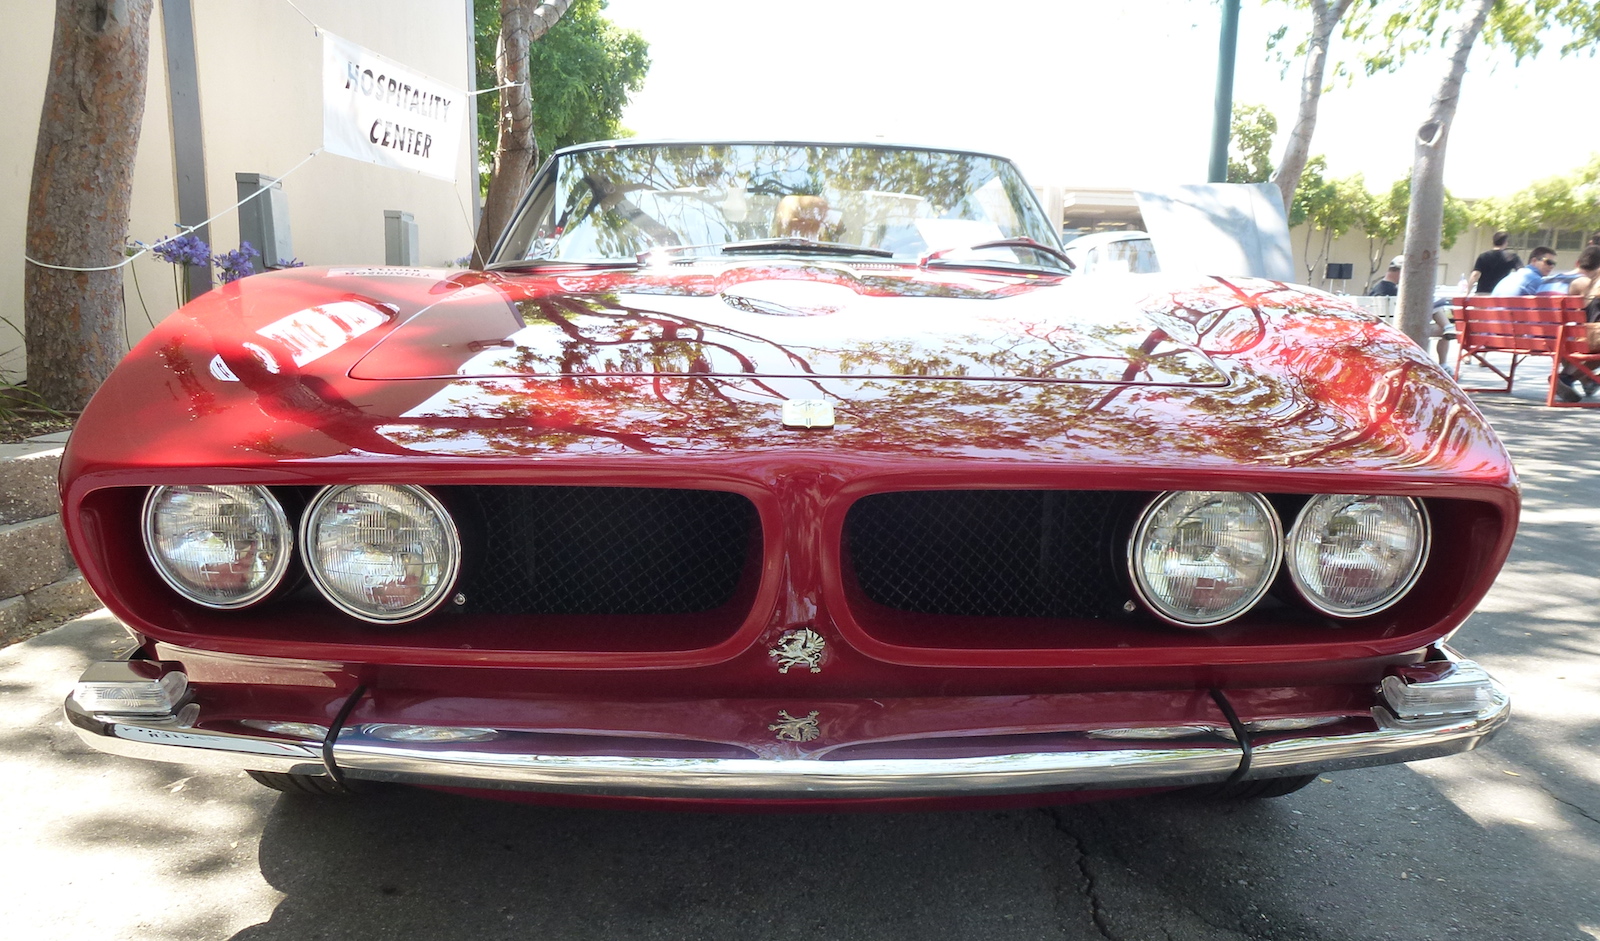 Iso Grifo For Sale - Exquisite And Very Rare No. 009